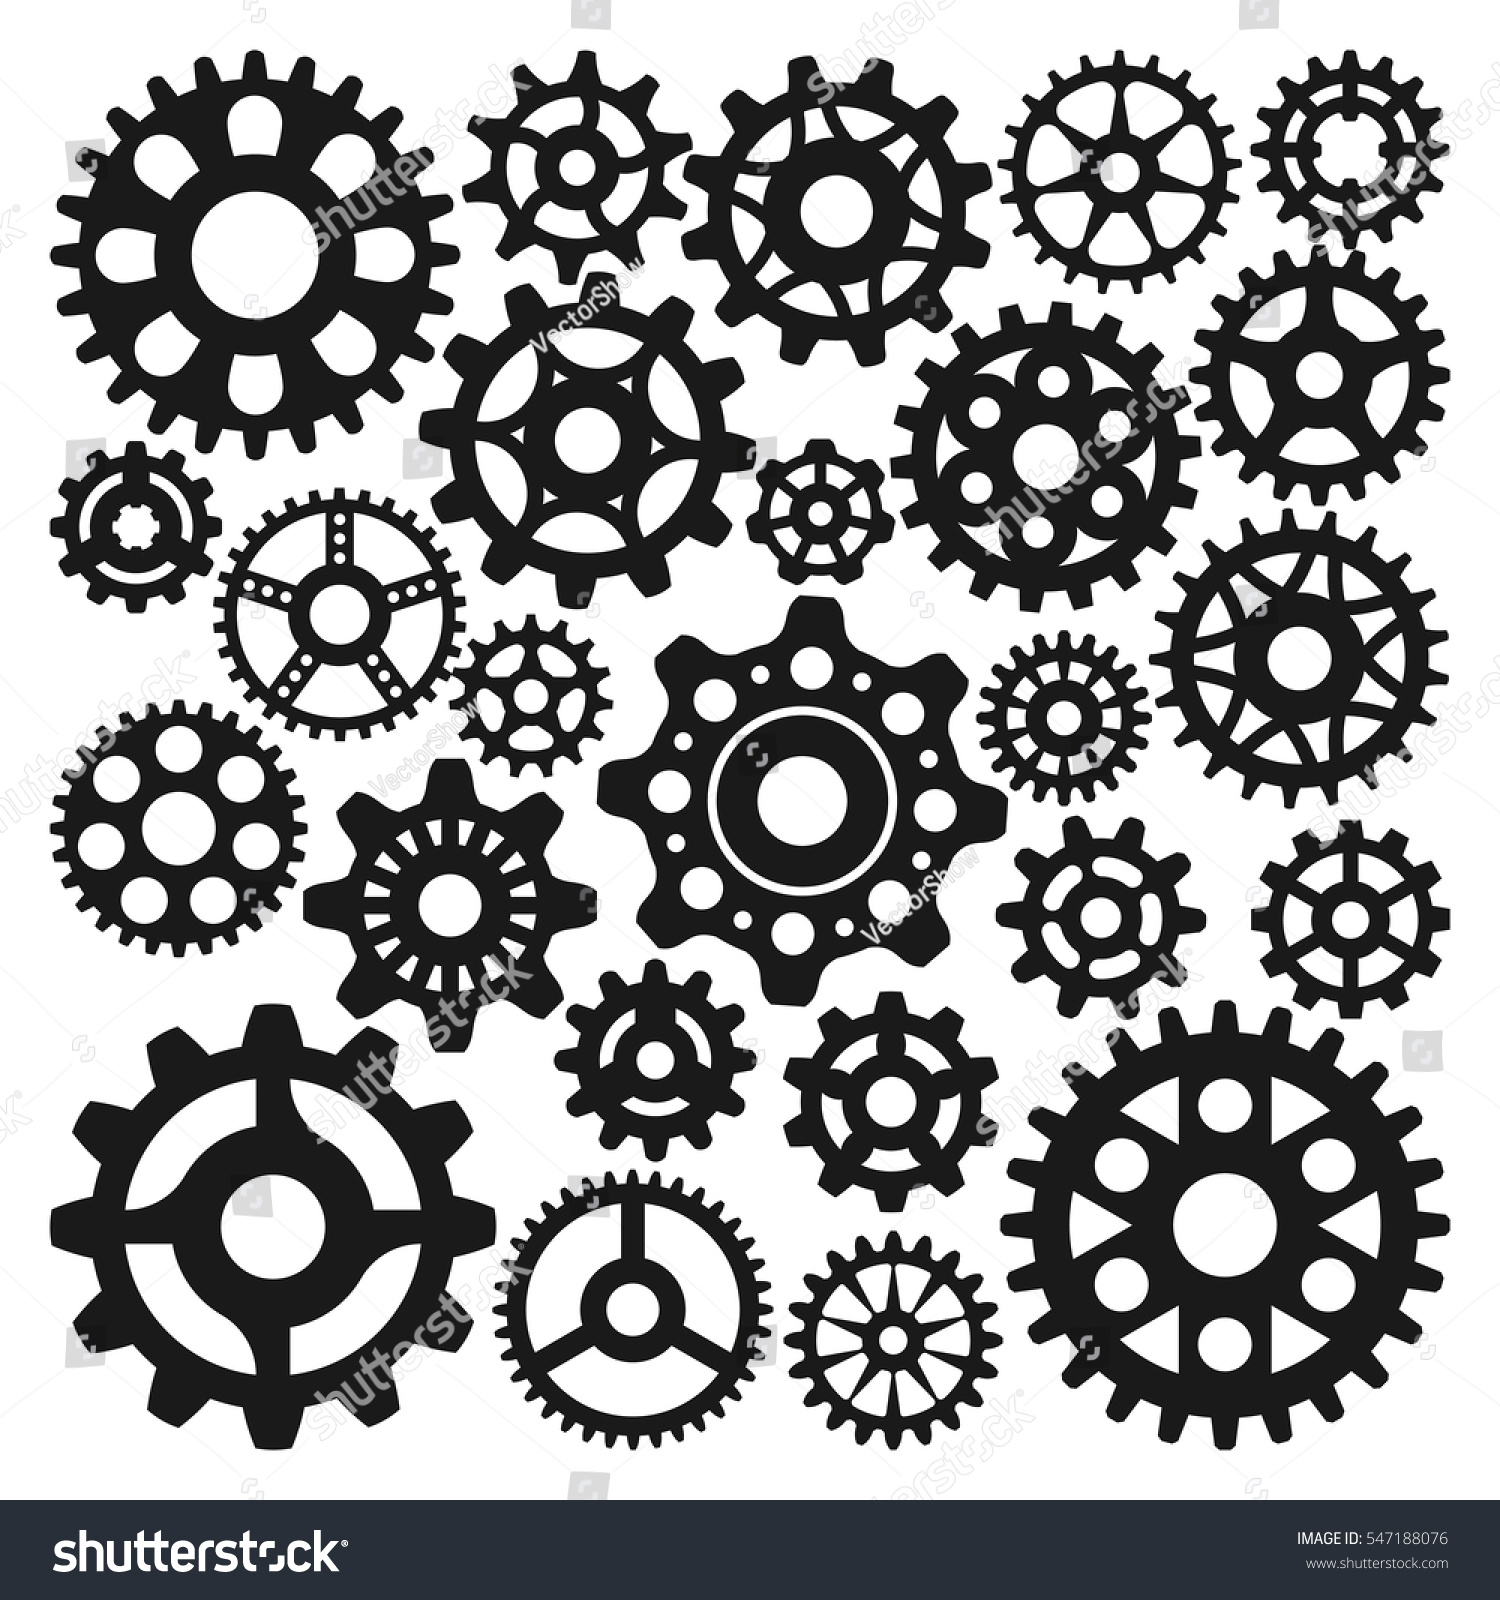 Black Gear Icons Isolated Vector Illustration Stock Vector 547188076